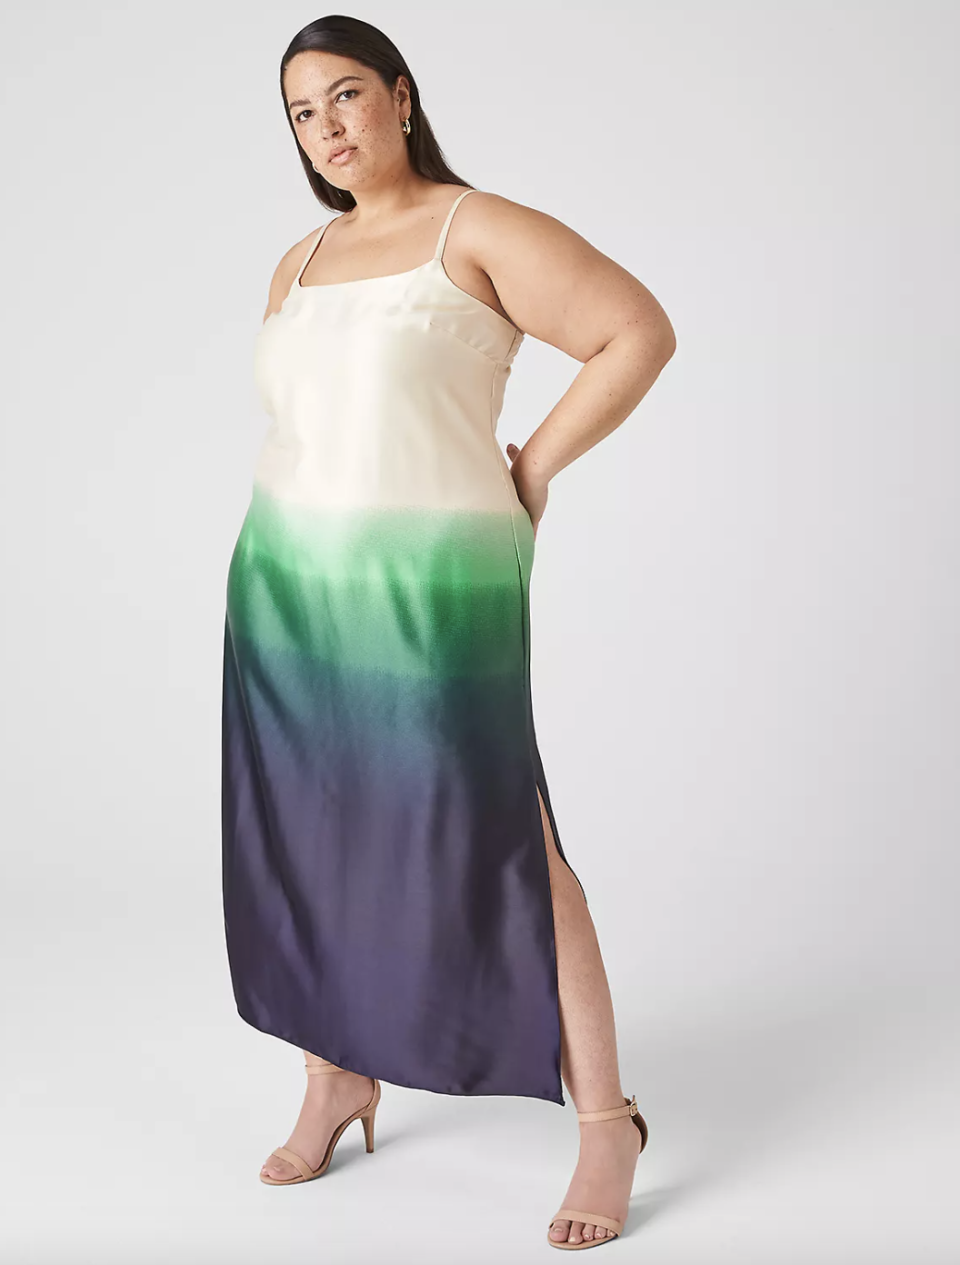 plus size model wearing ombre white, green and blue Scoop-Neck Cami Slip Dress (photo via Lane Bryant)